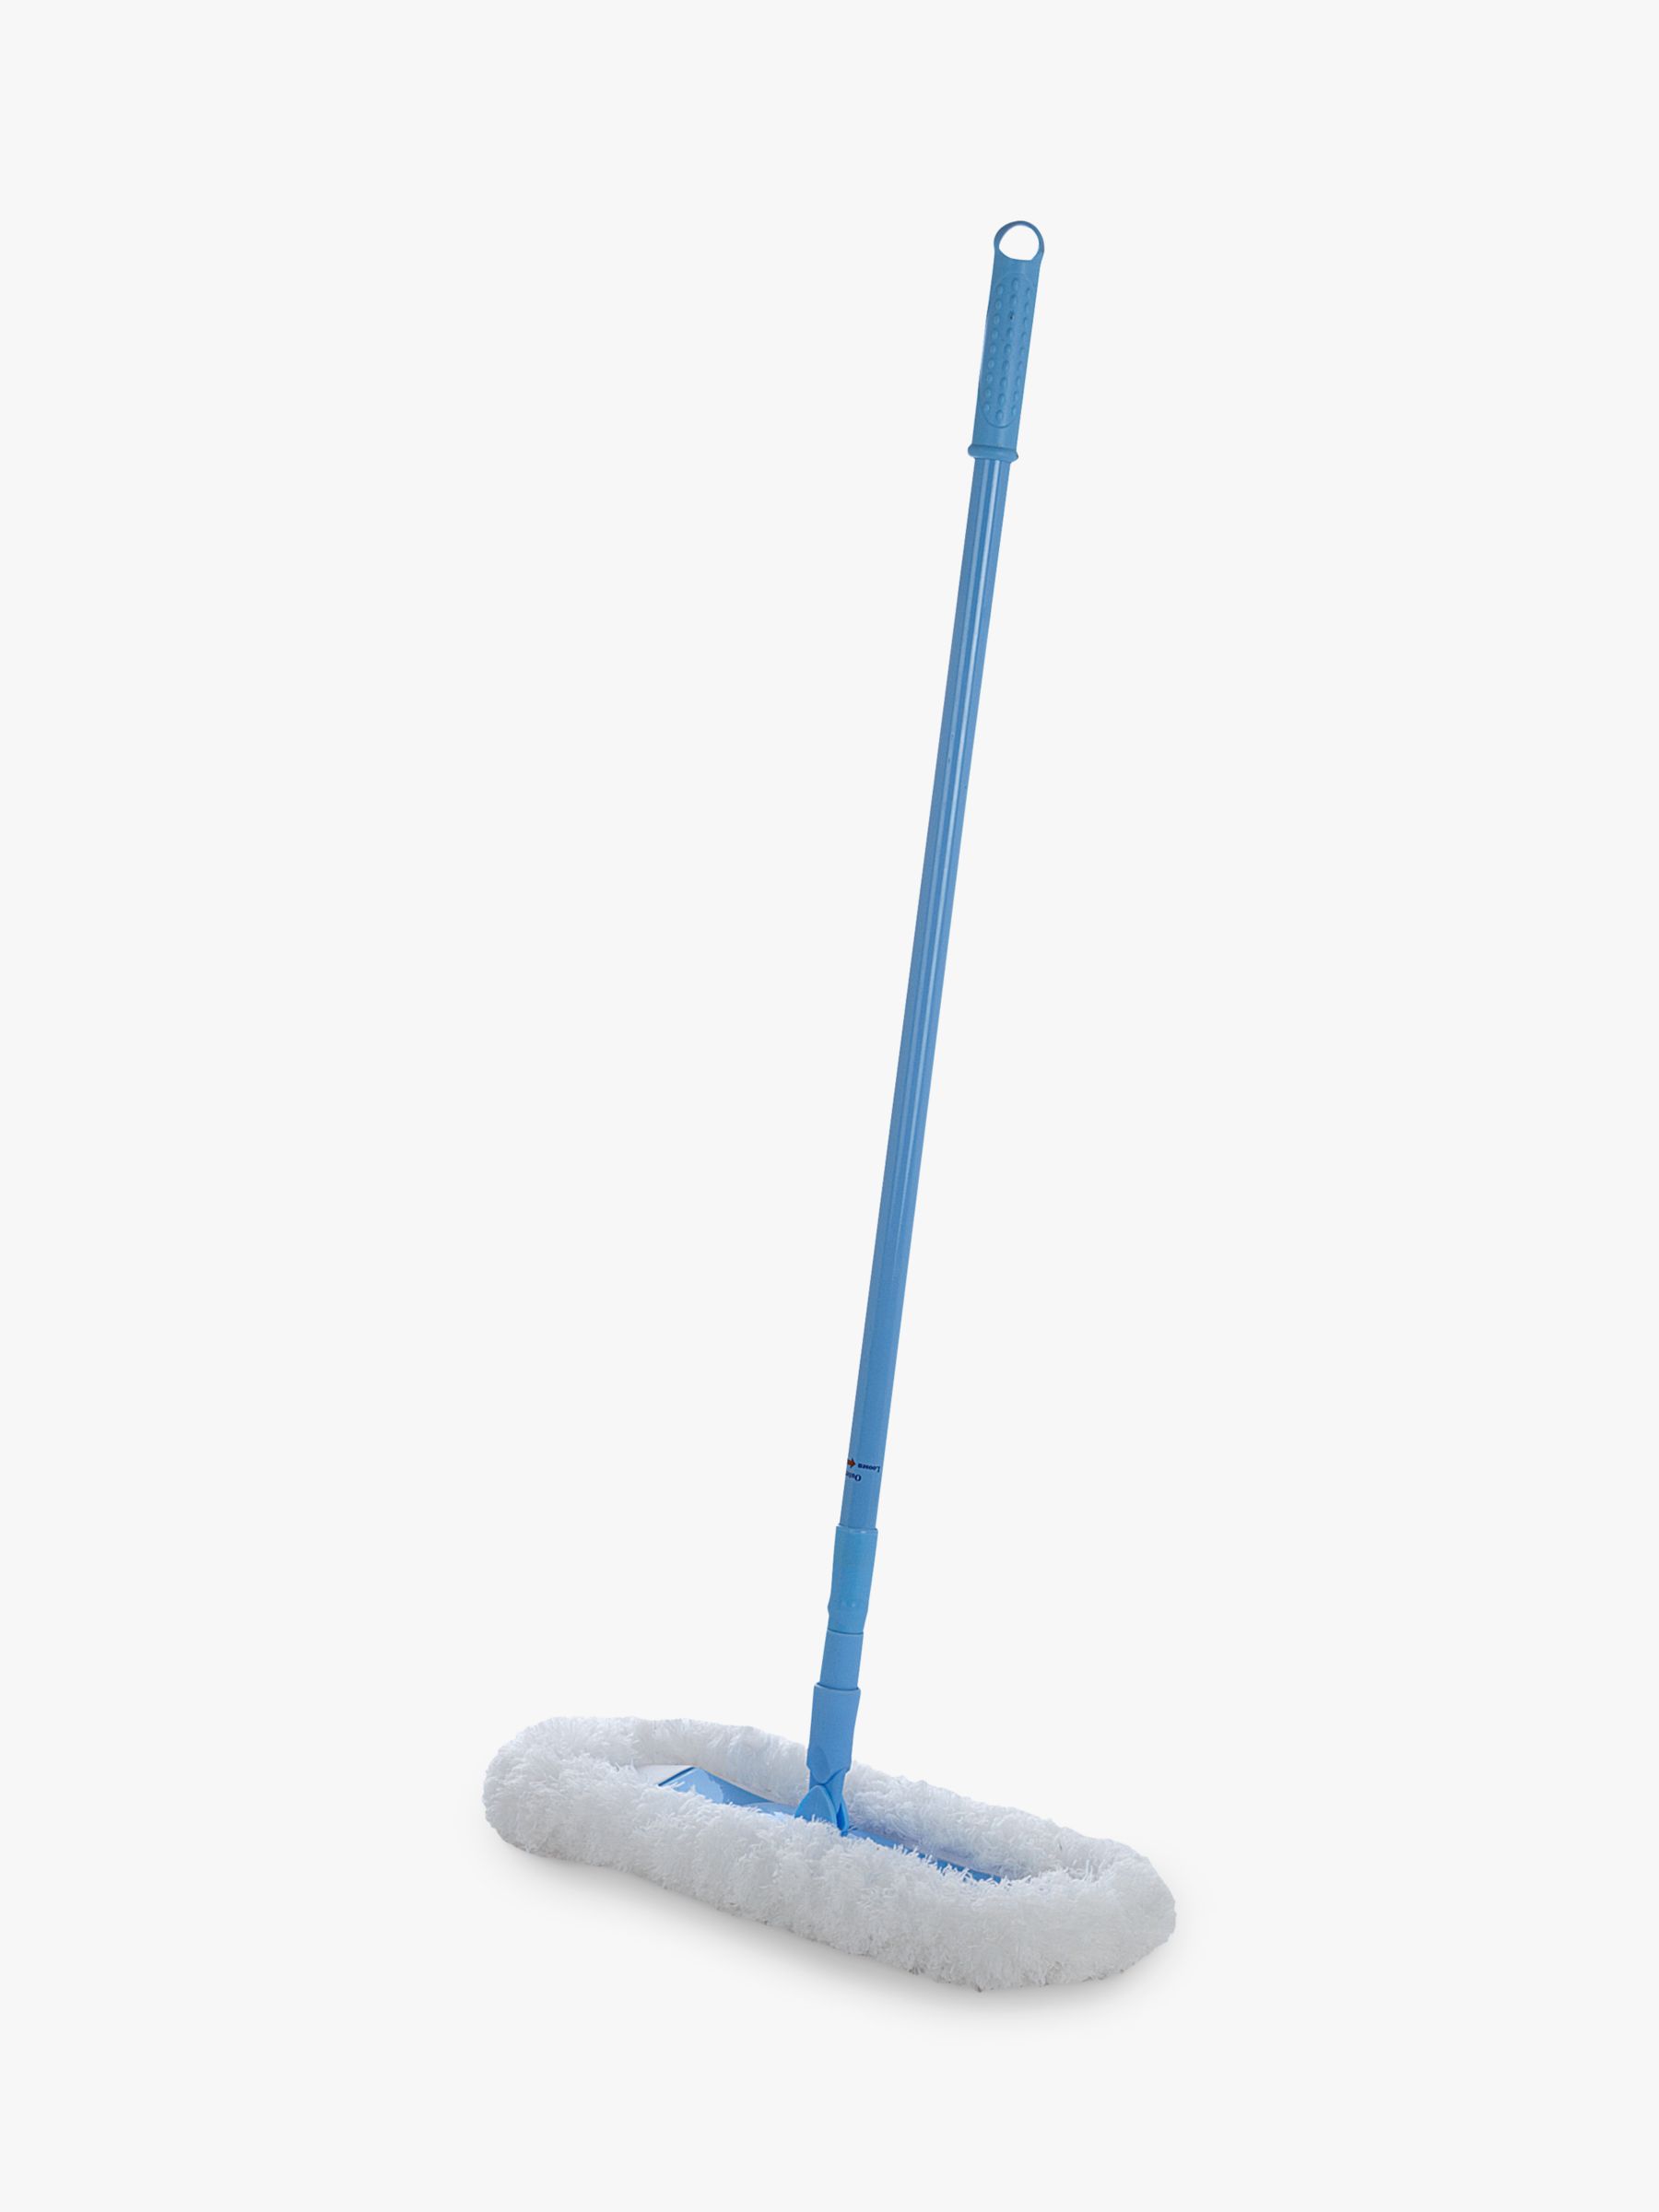 E Cloth Flexi Edge Floor And Wall Duster At John Lewis Partners